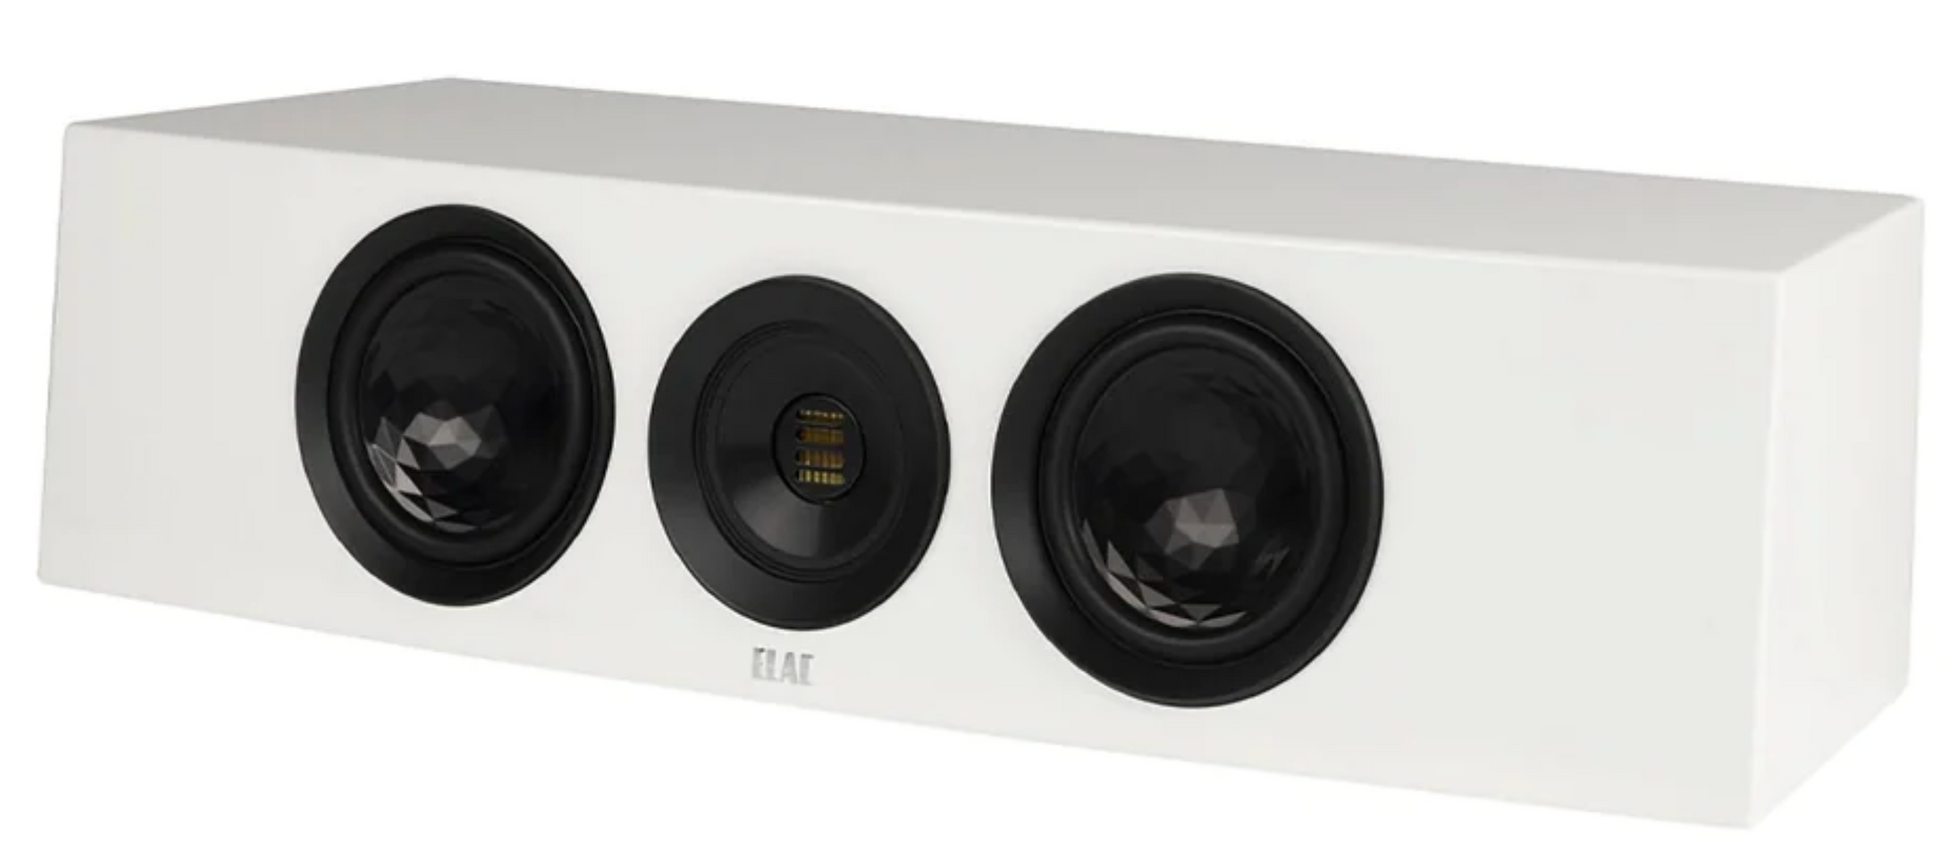 ELAC Concentro Centre Channel Speaker in white. Angled image